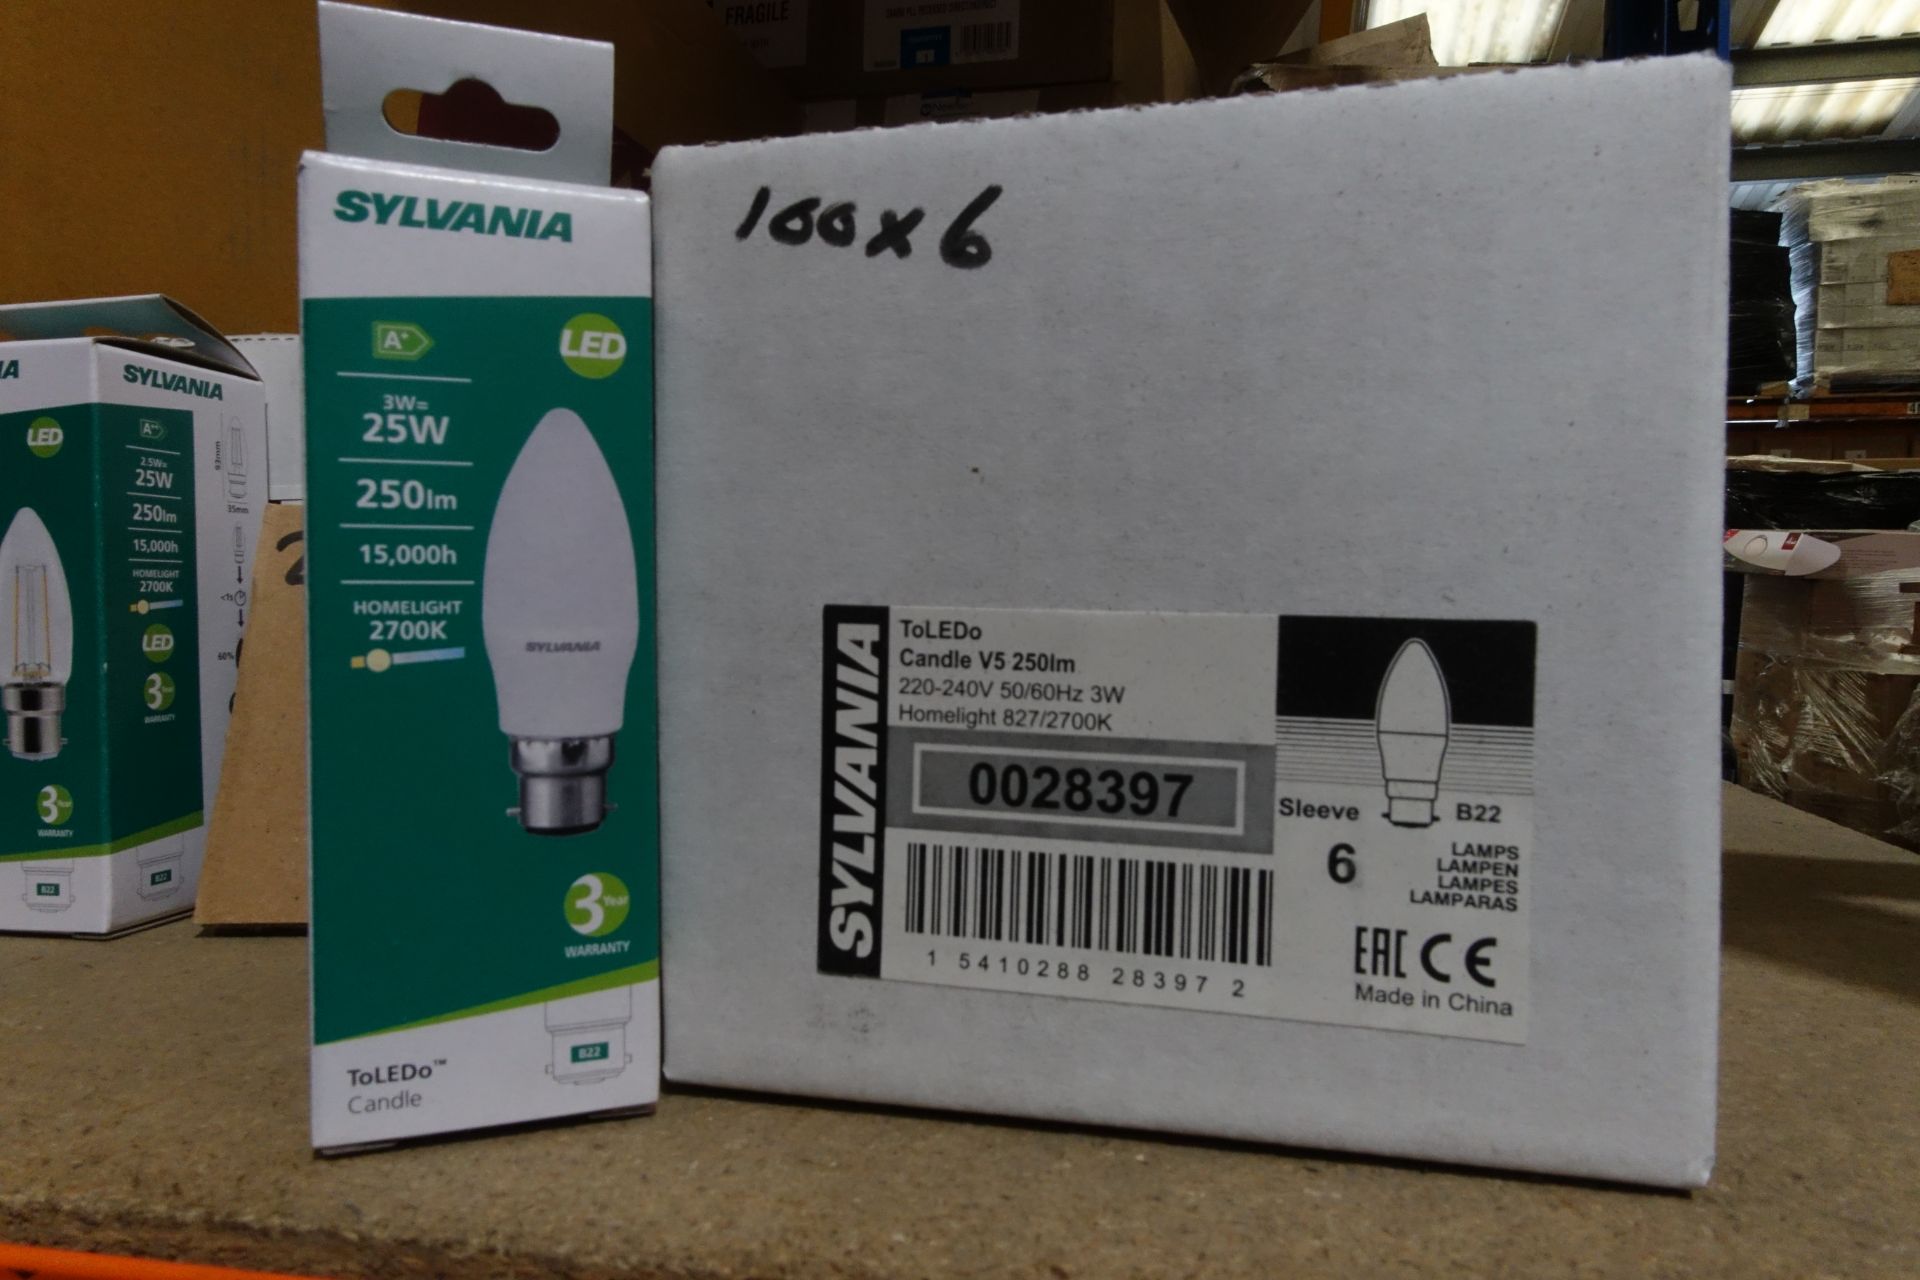 180 x SYLVANIA 0028397 3W LED Candle Lamps B22 Fitting